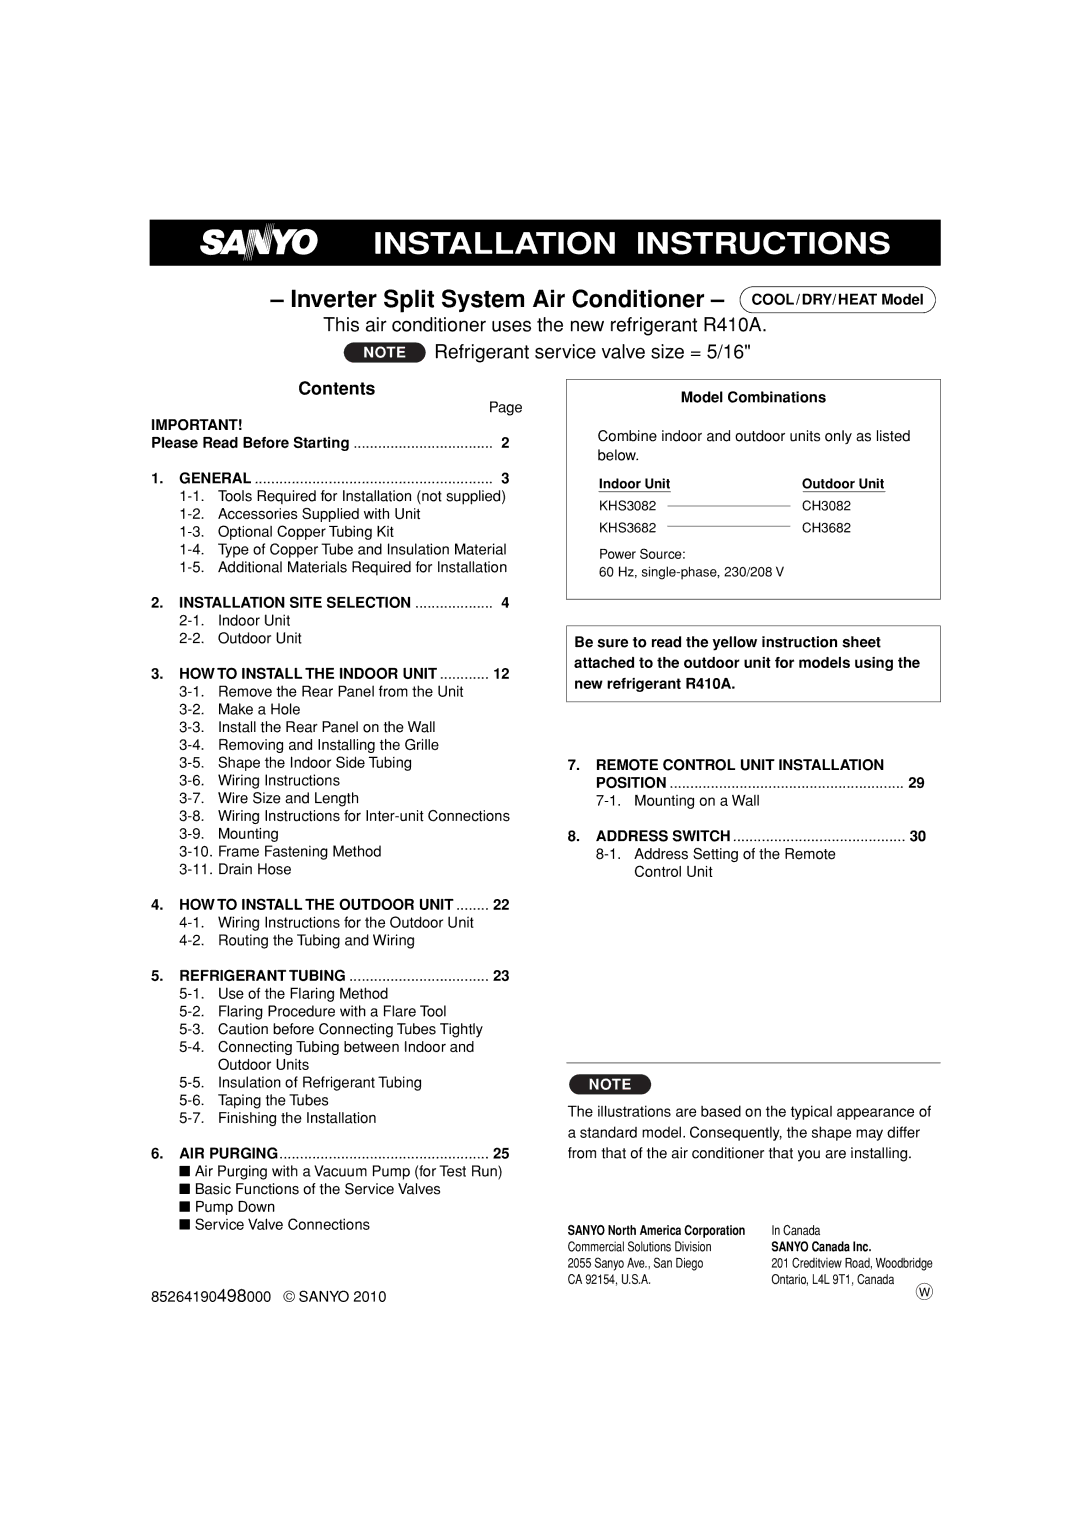 Sanyo KHS3082 + CH3082, KHS3682 + CH3682 service manual Installation Instructions, Contents 